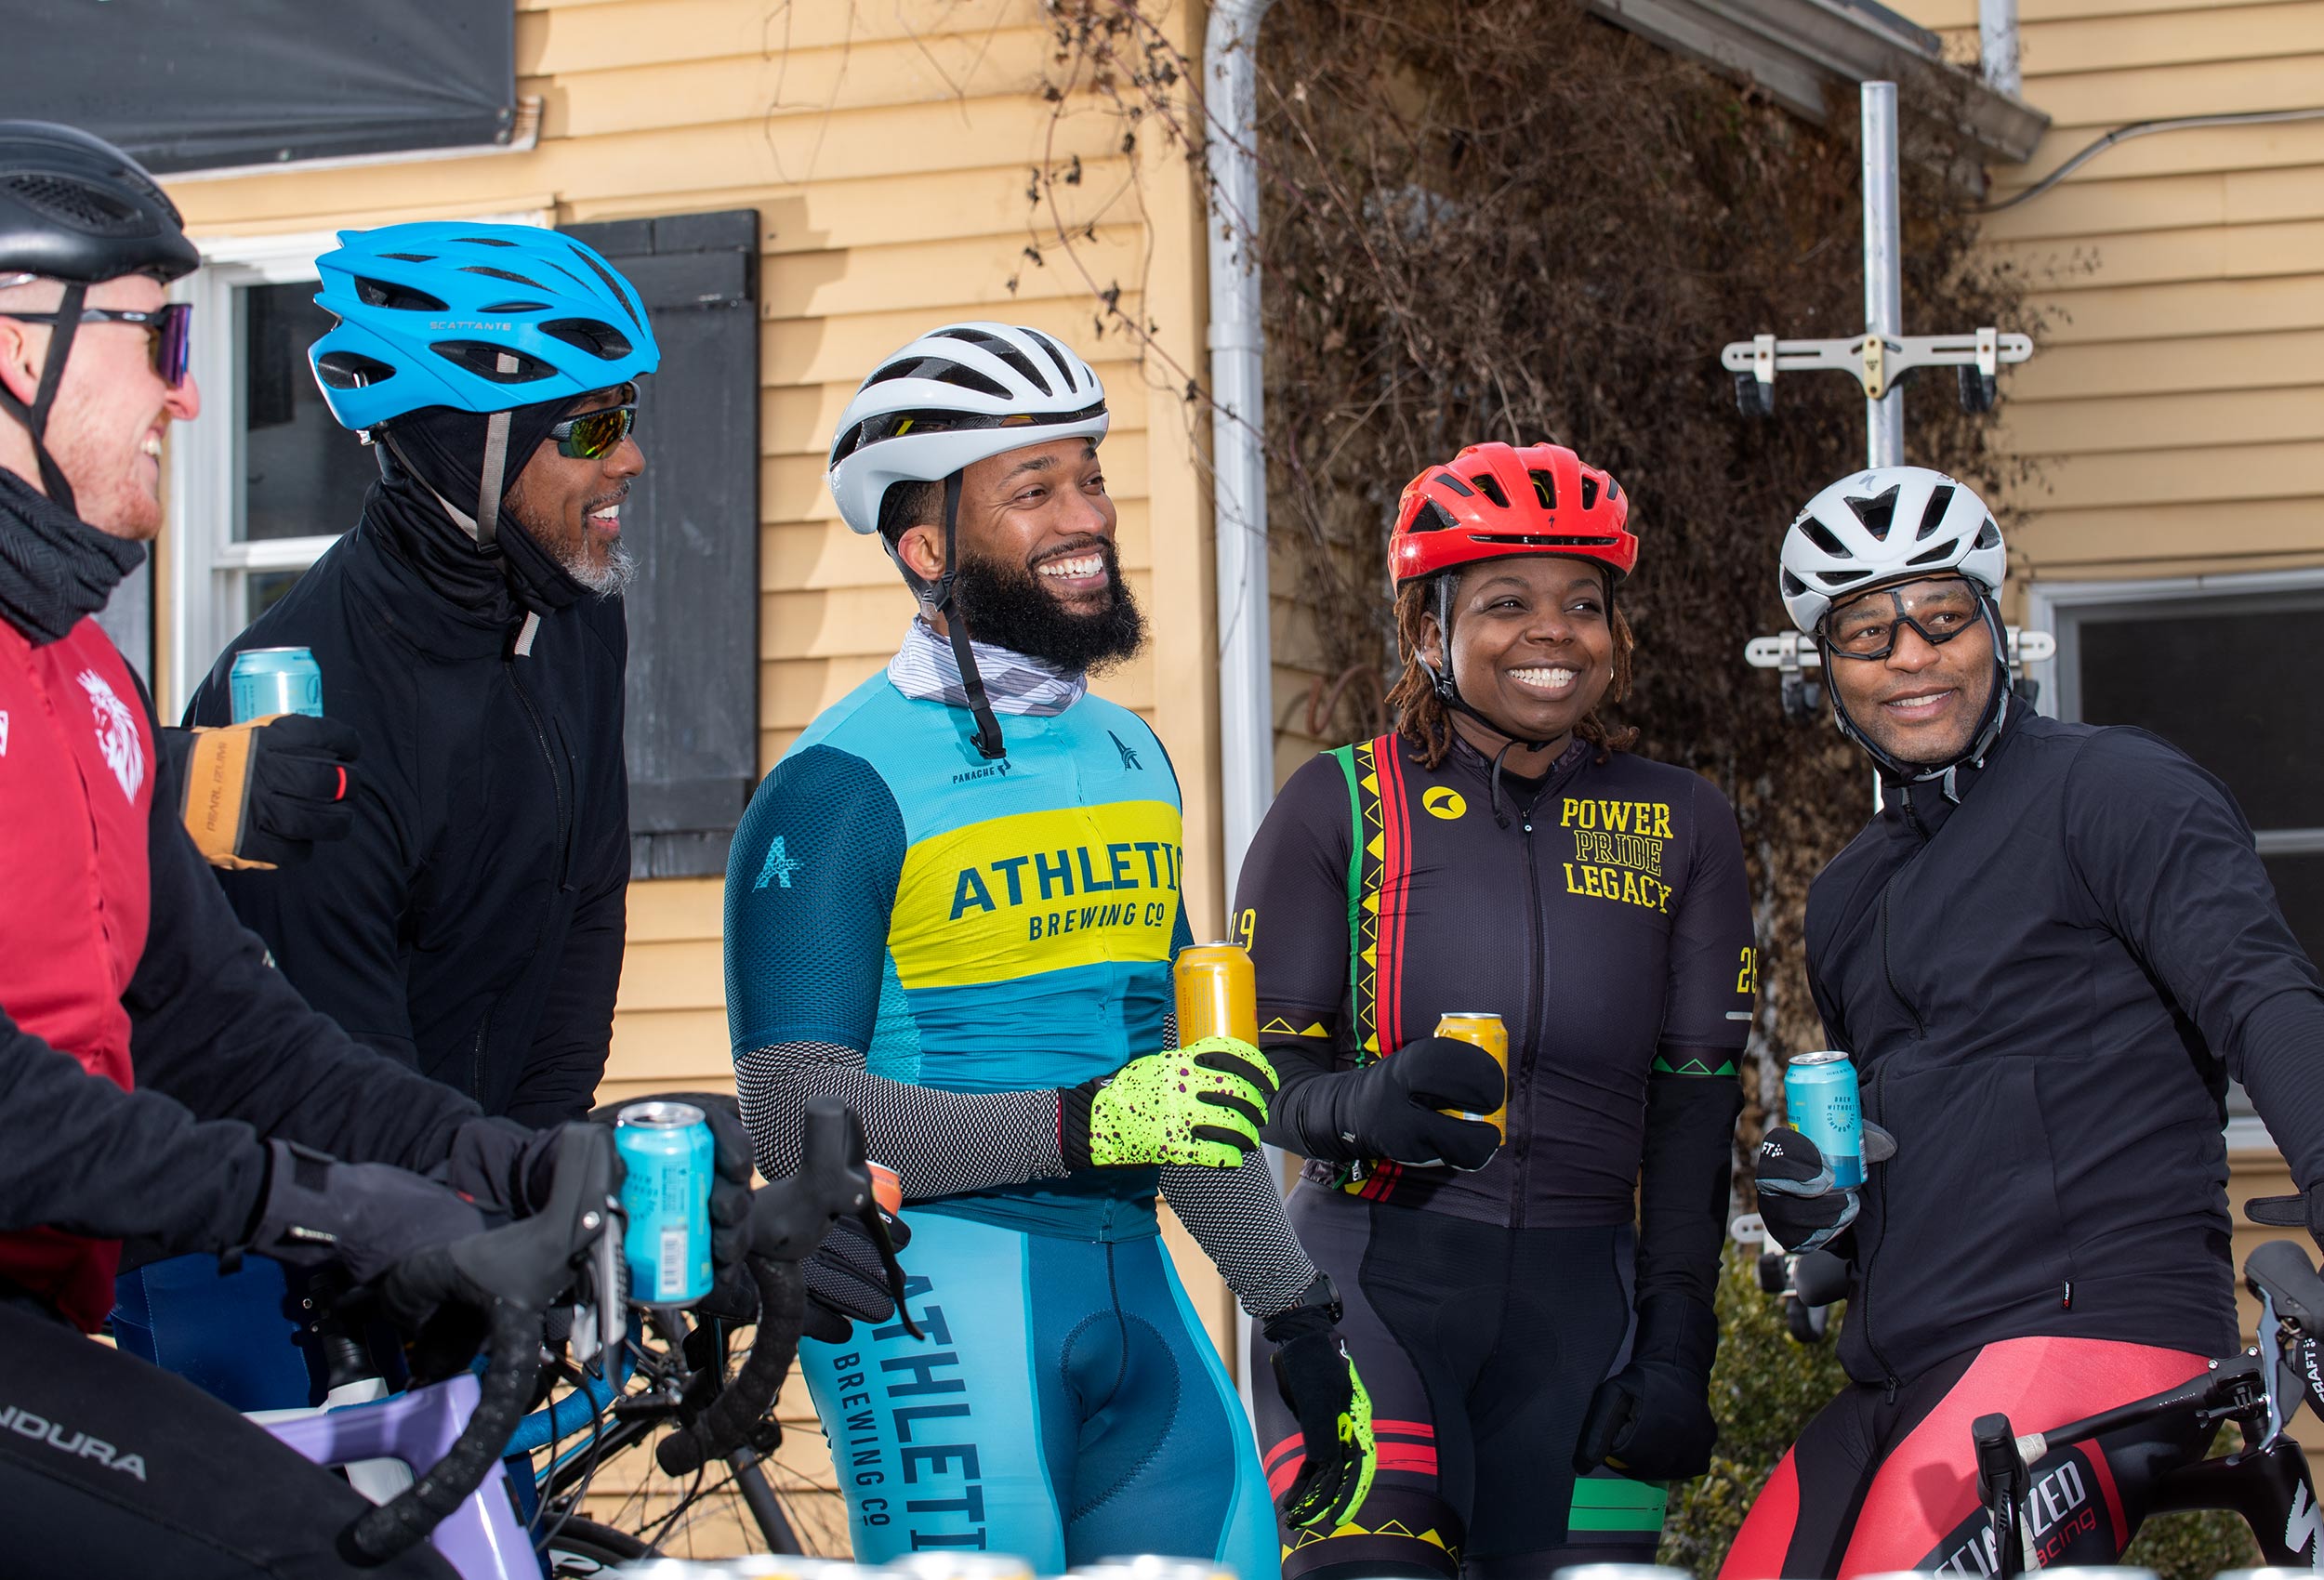 Ambassador Anthony Cooper-Jenkins drinks non-alcoholic beer with cyclist friends - advertising for Athletic Brewing Co.